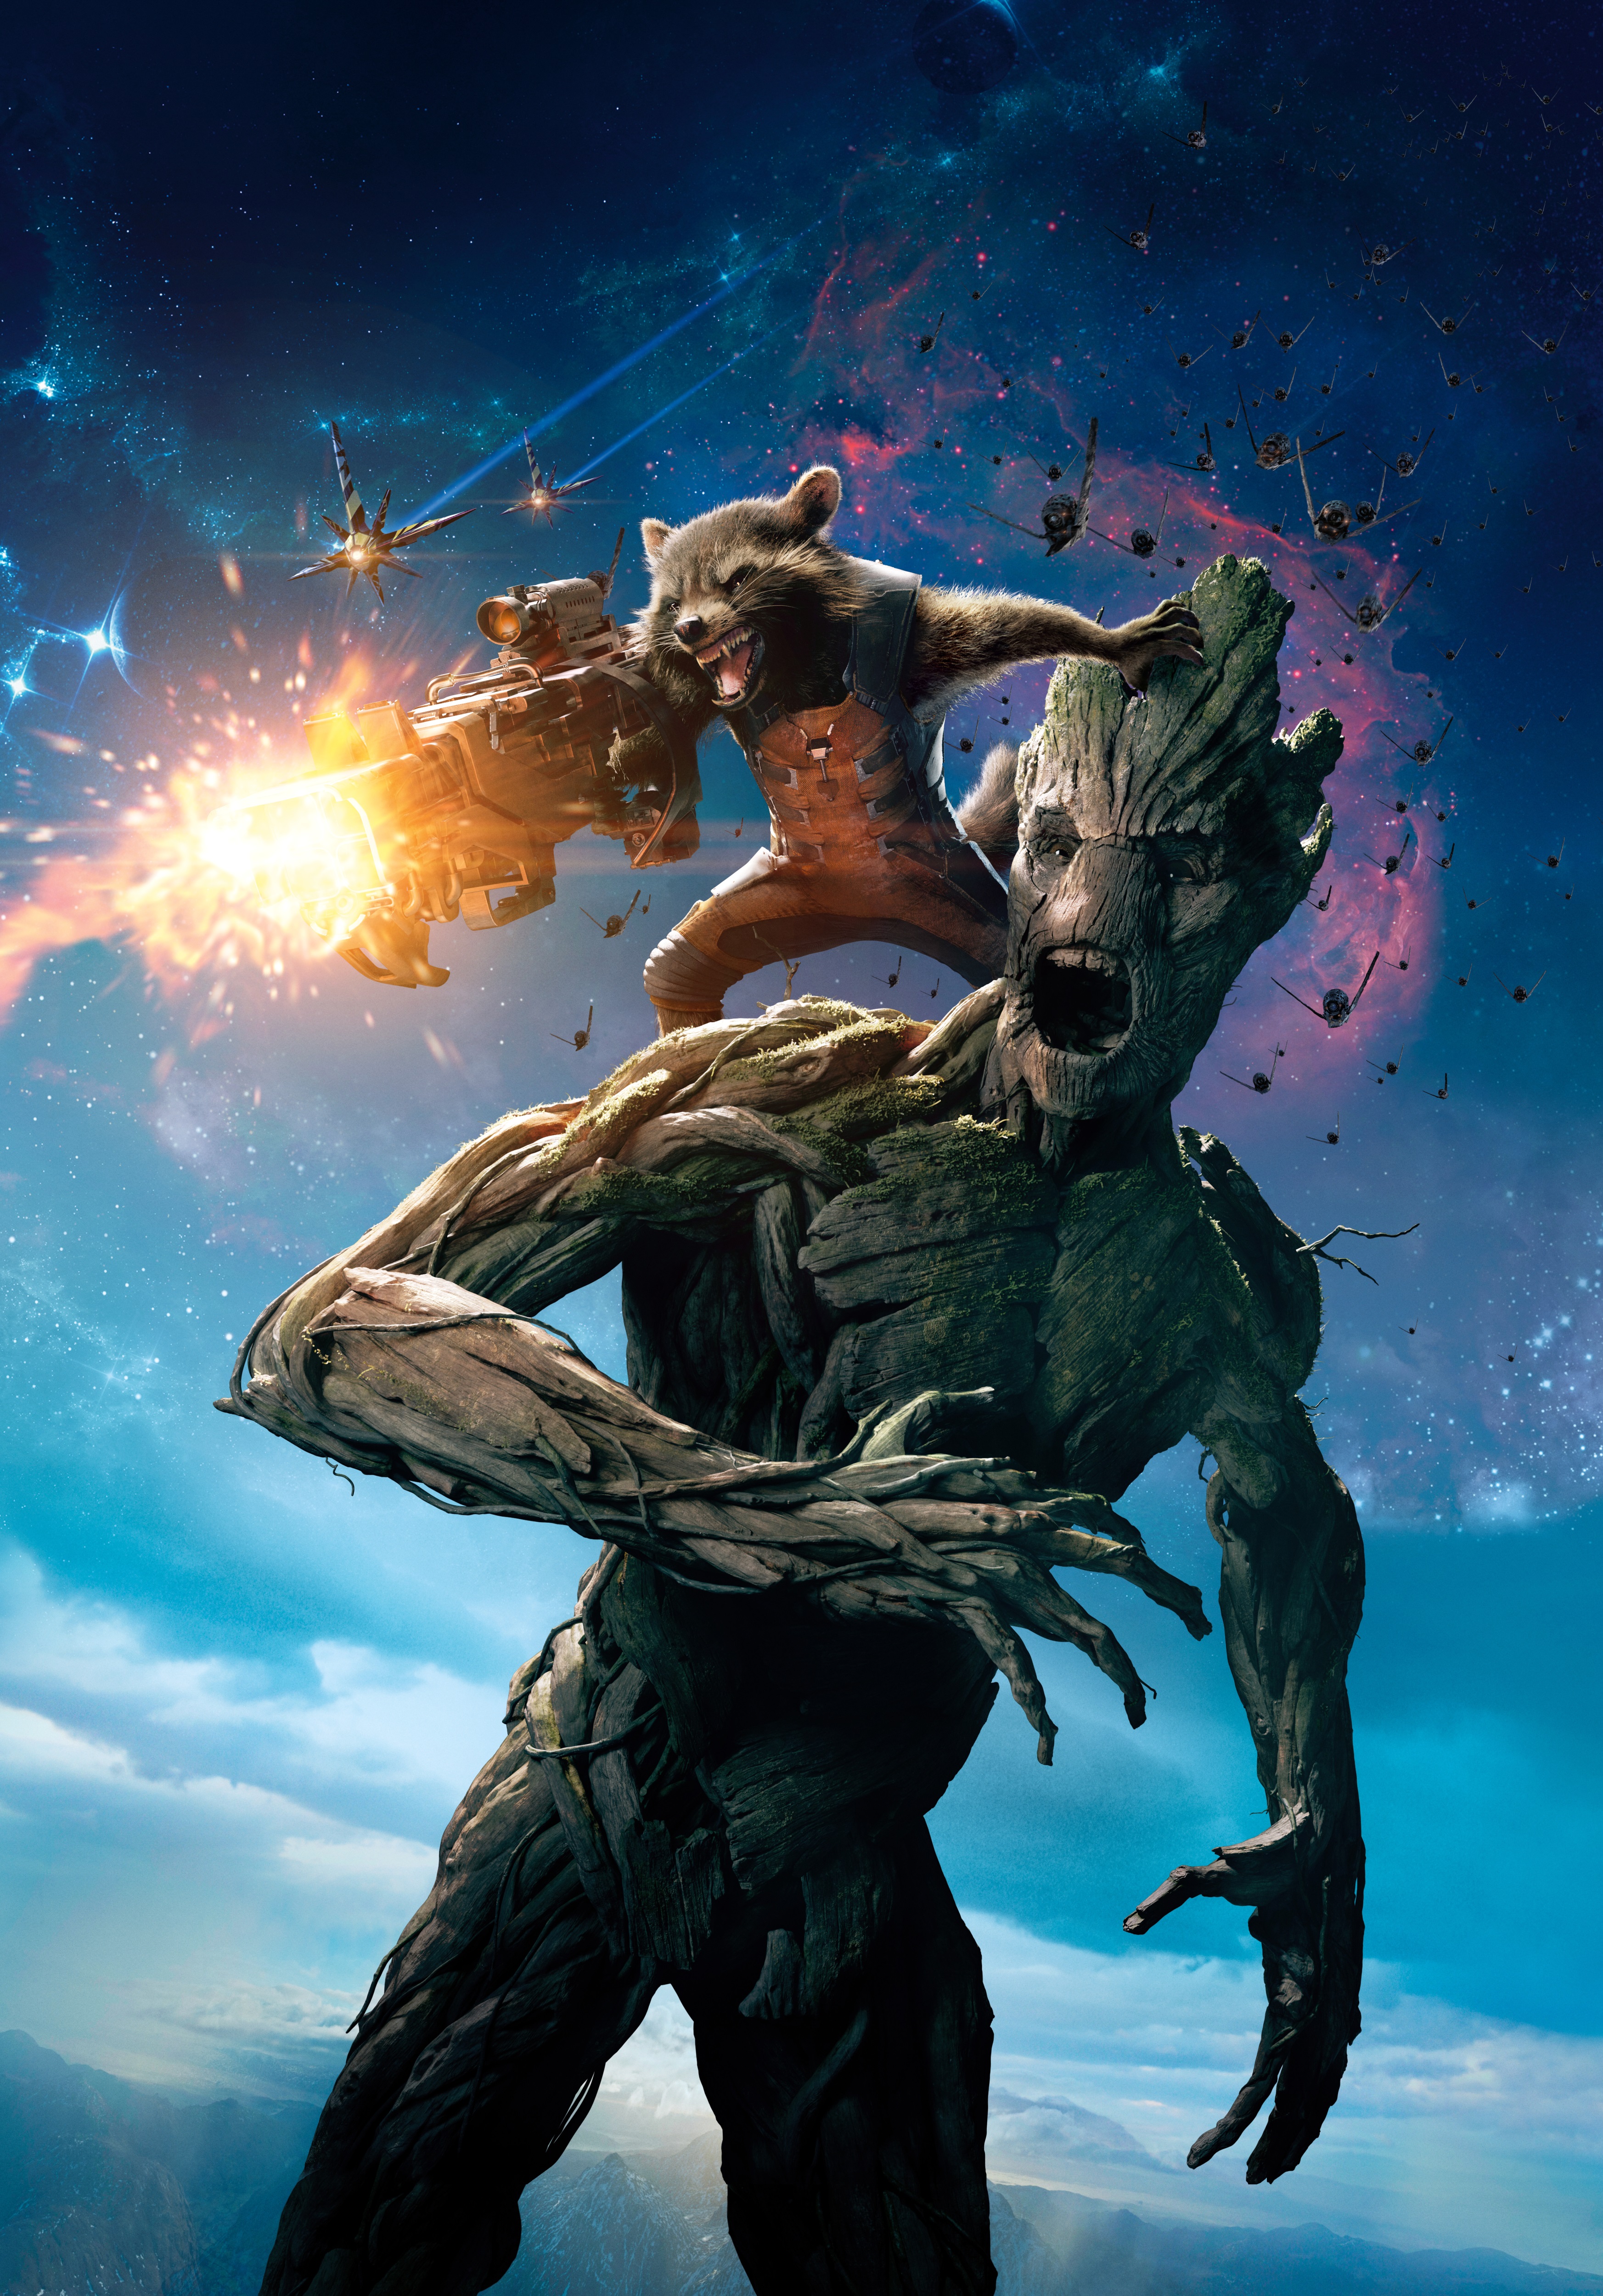 Rocket Raccoon And Groot From Marvel S Guardians Of The Galaxy Movie